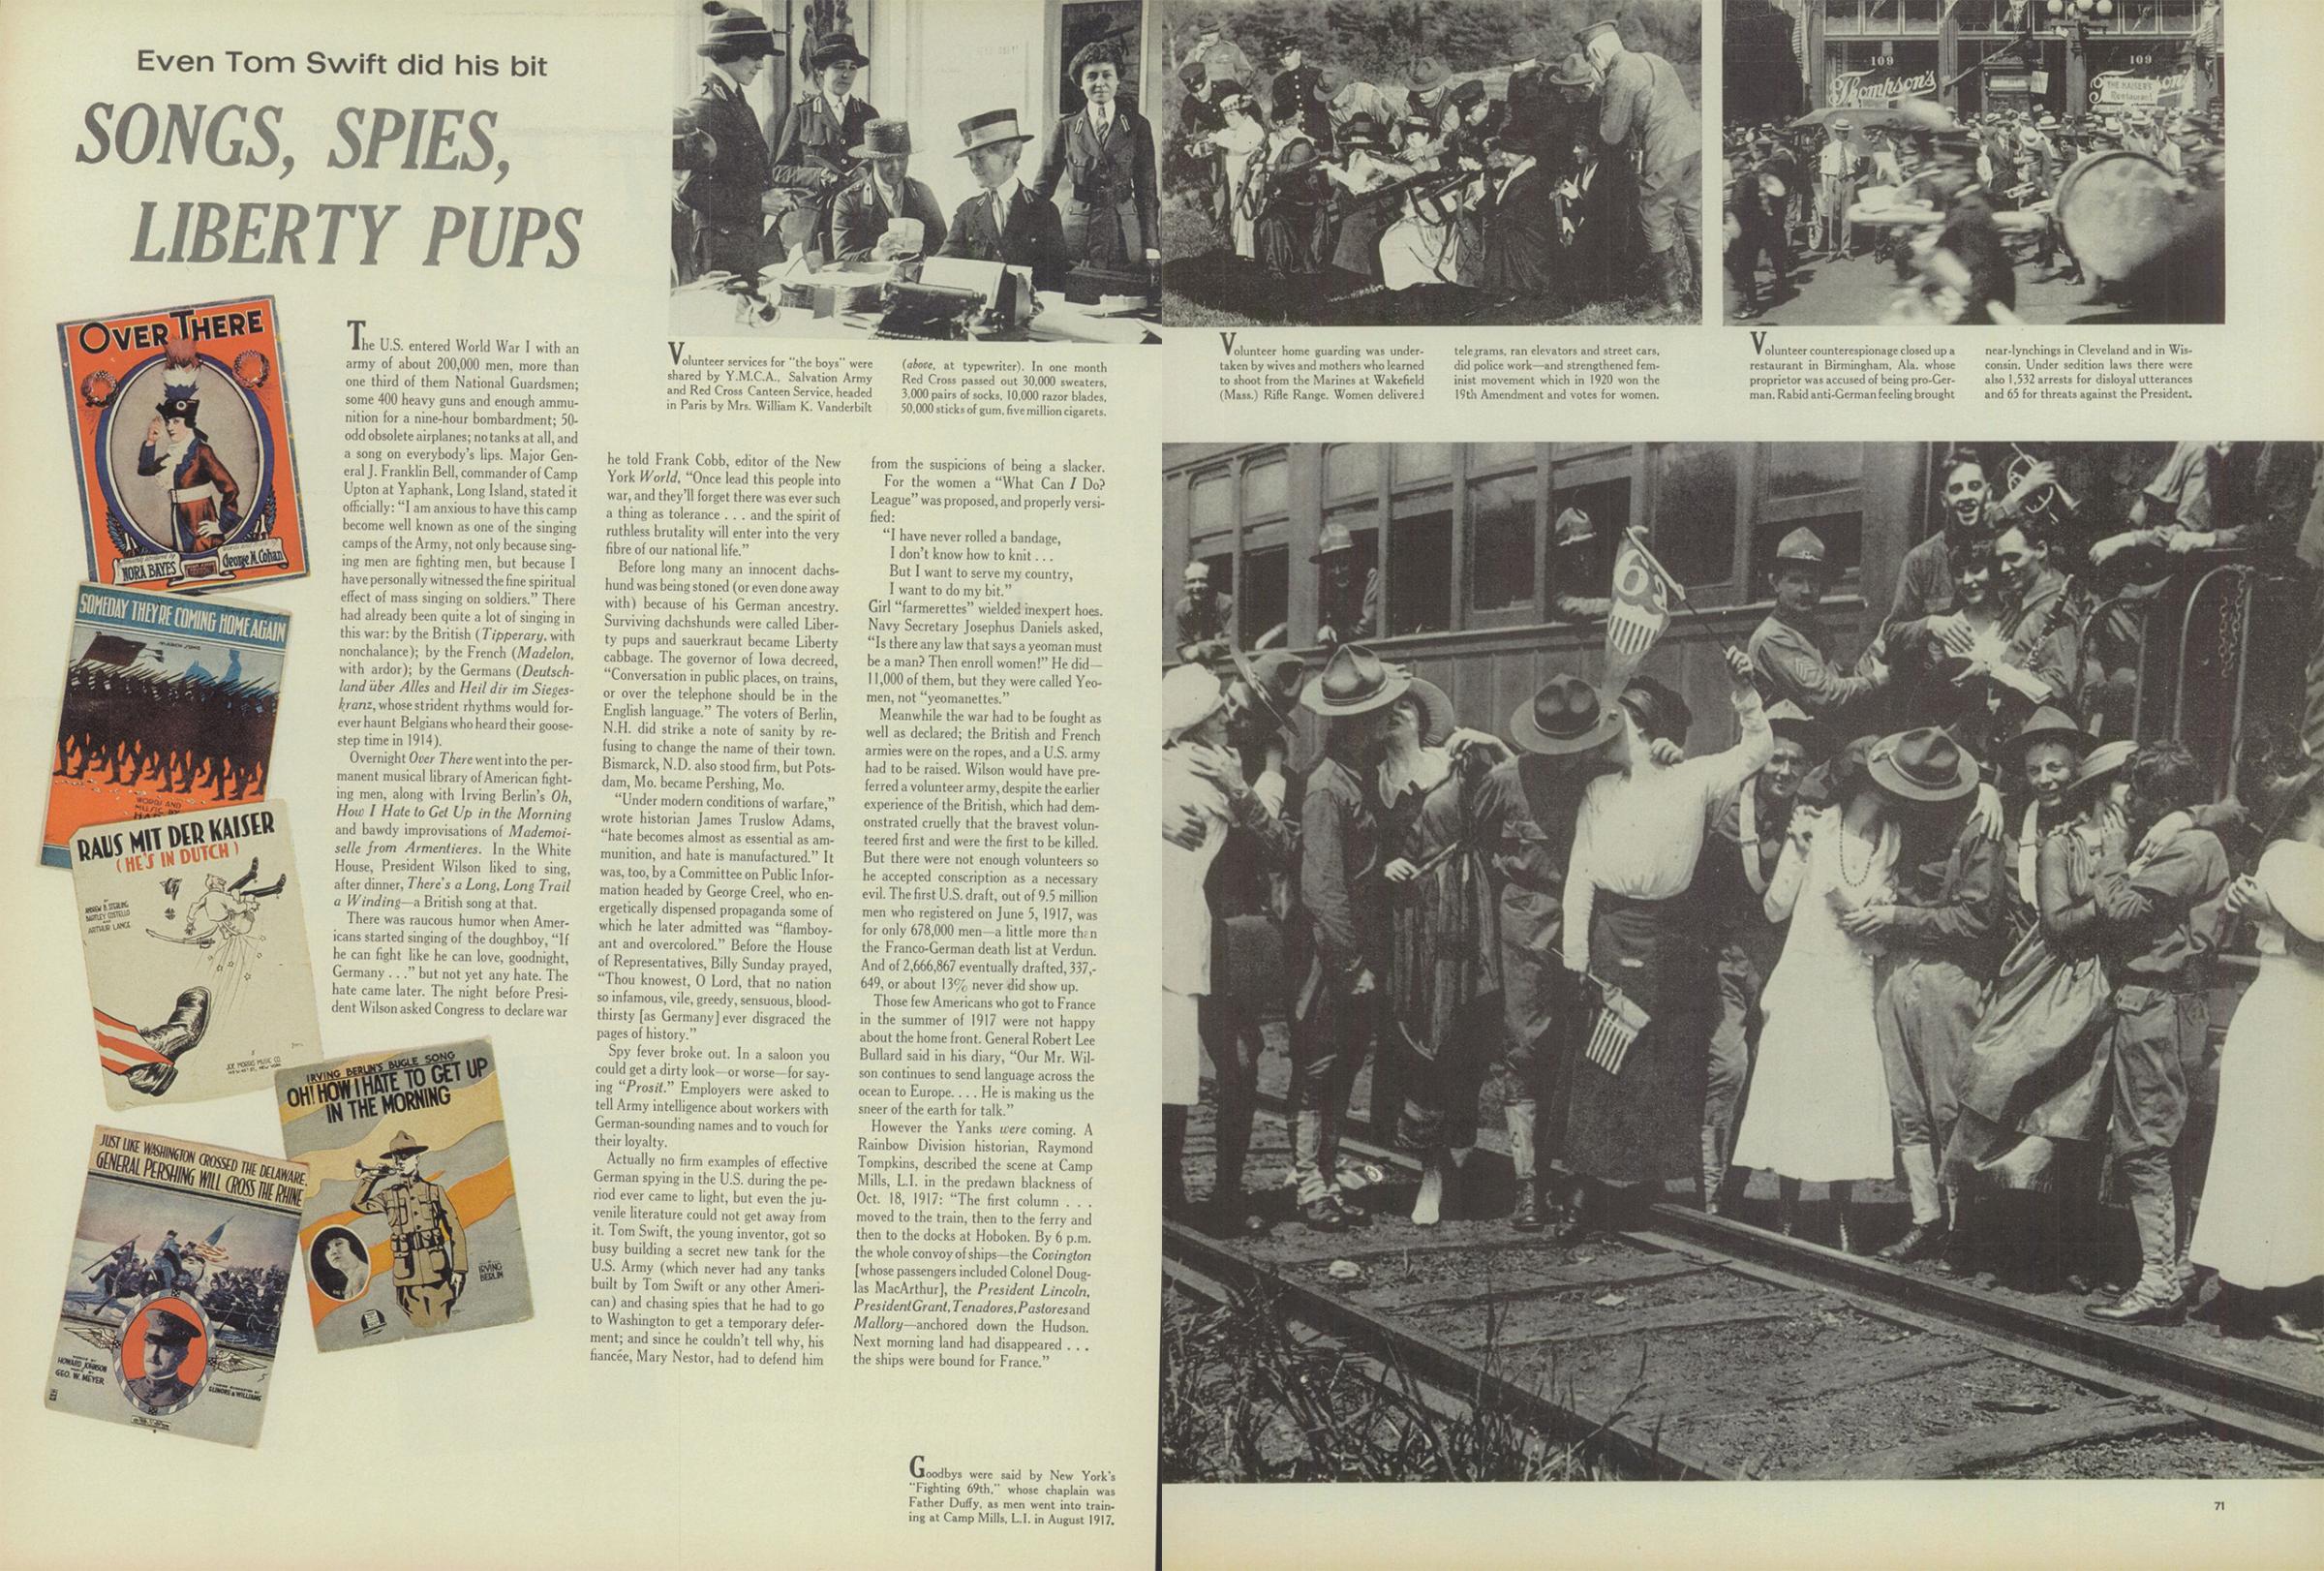 Part V of the First World War series in LIFE magazine from the May 22, 1964 issue.